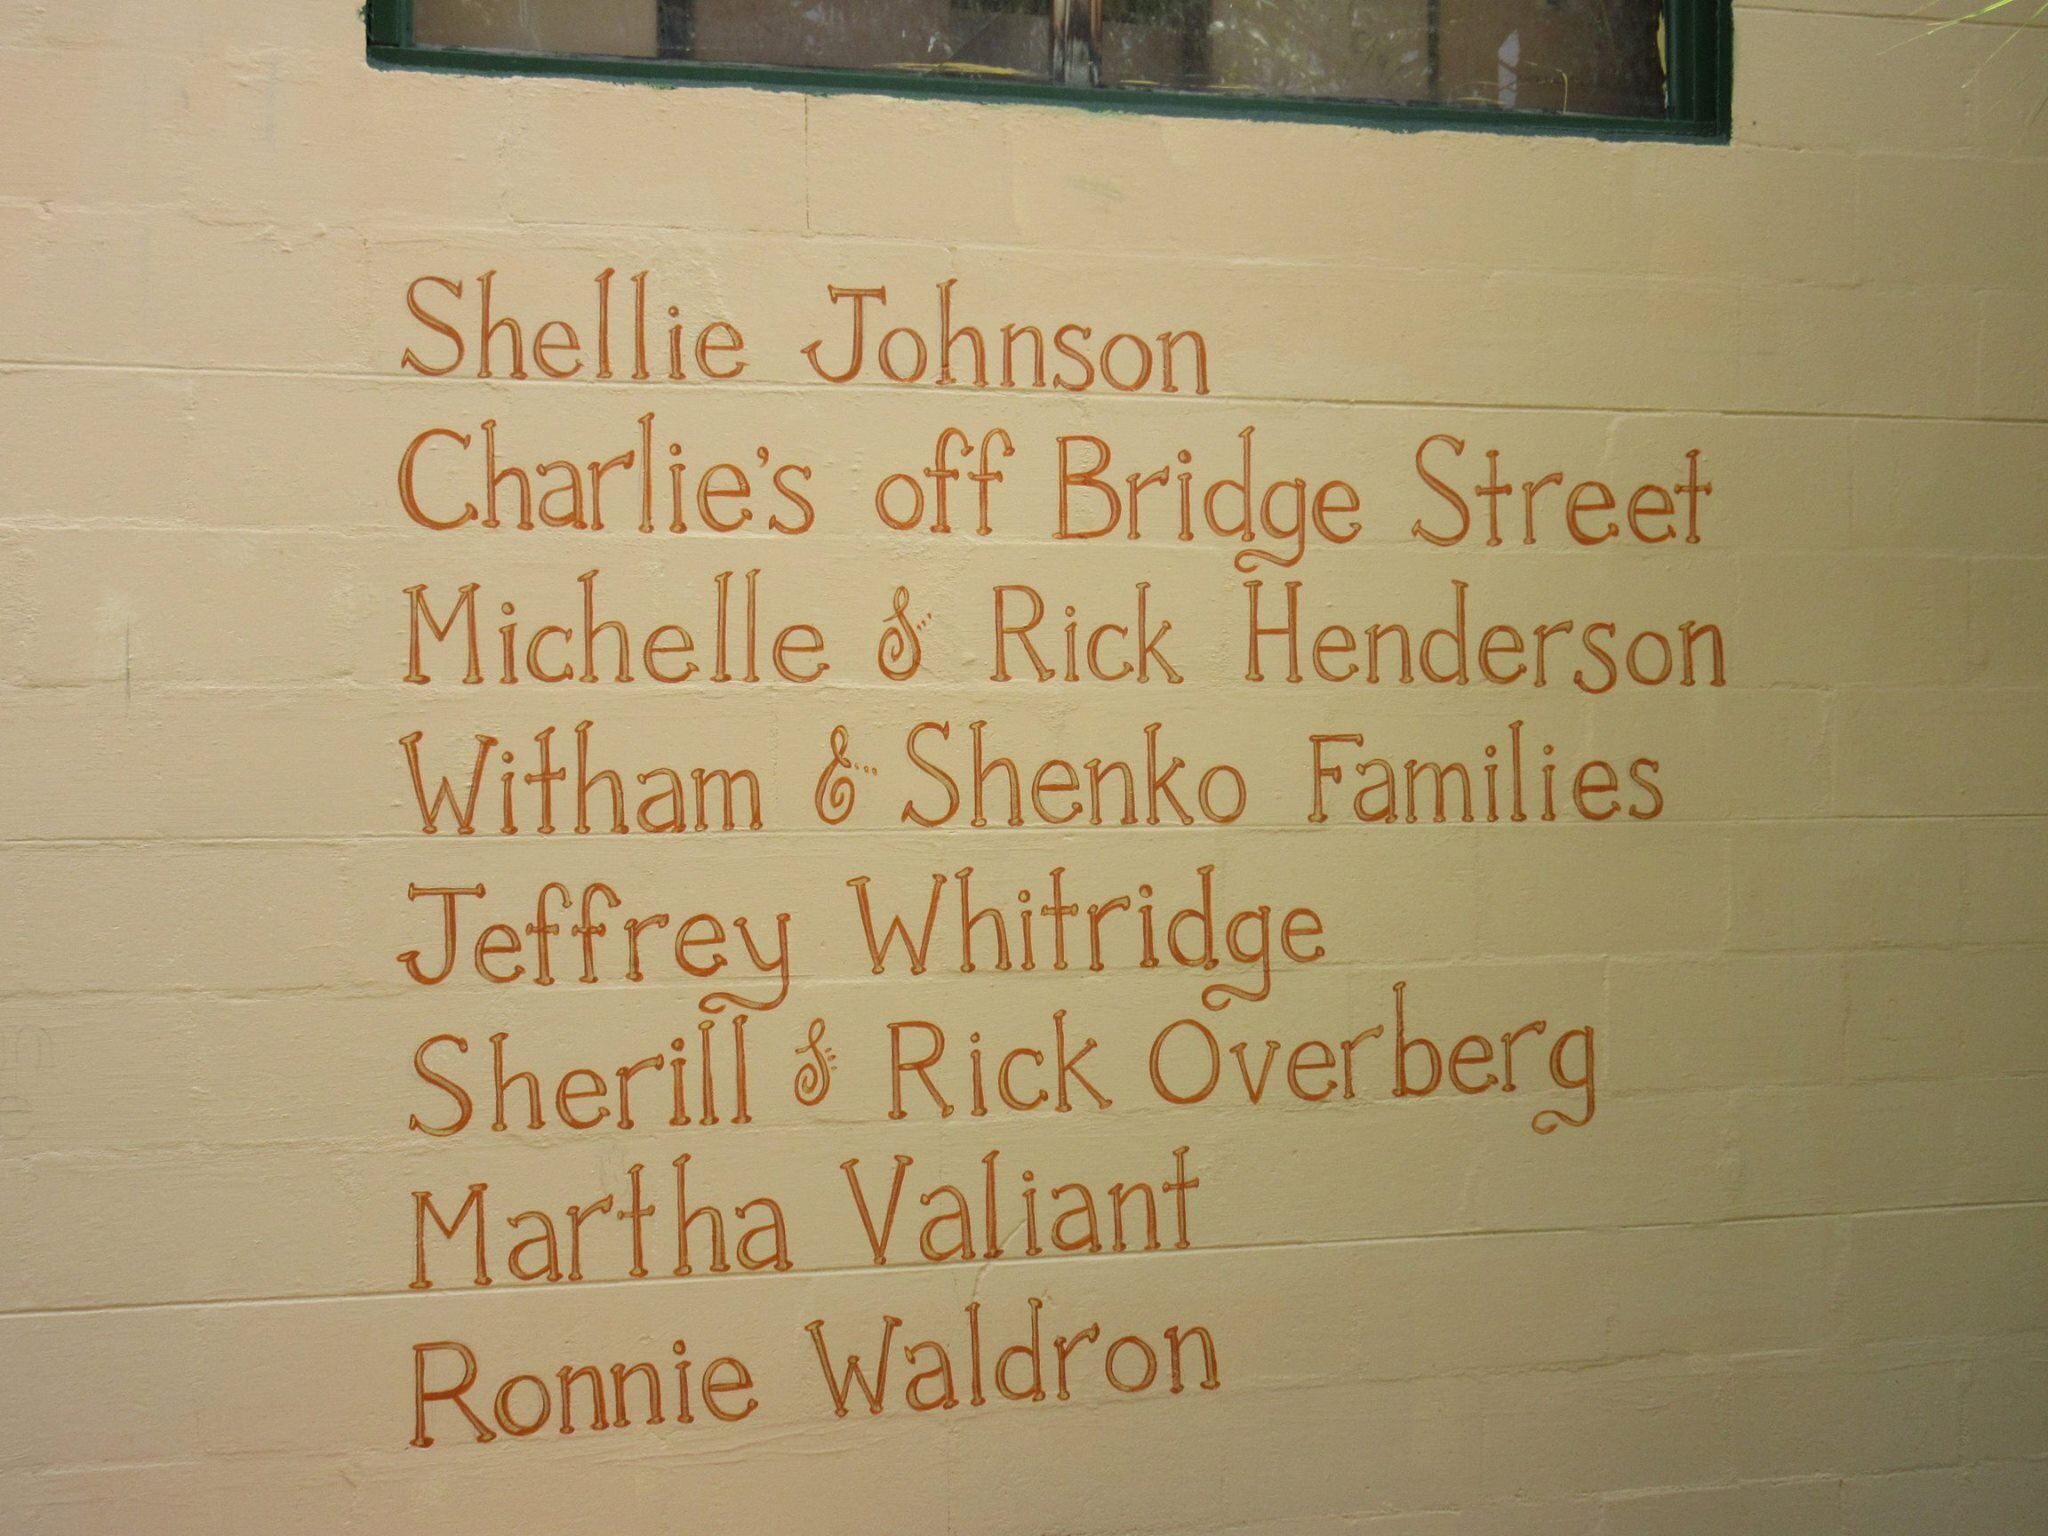 Section of the mural thanking individuals for their support